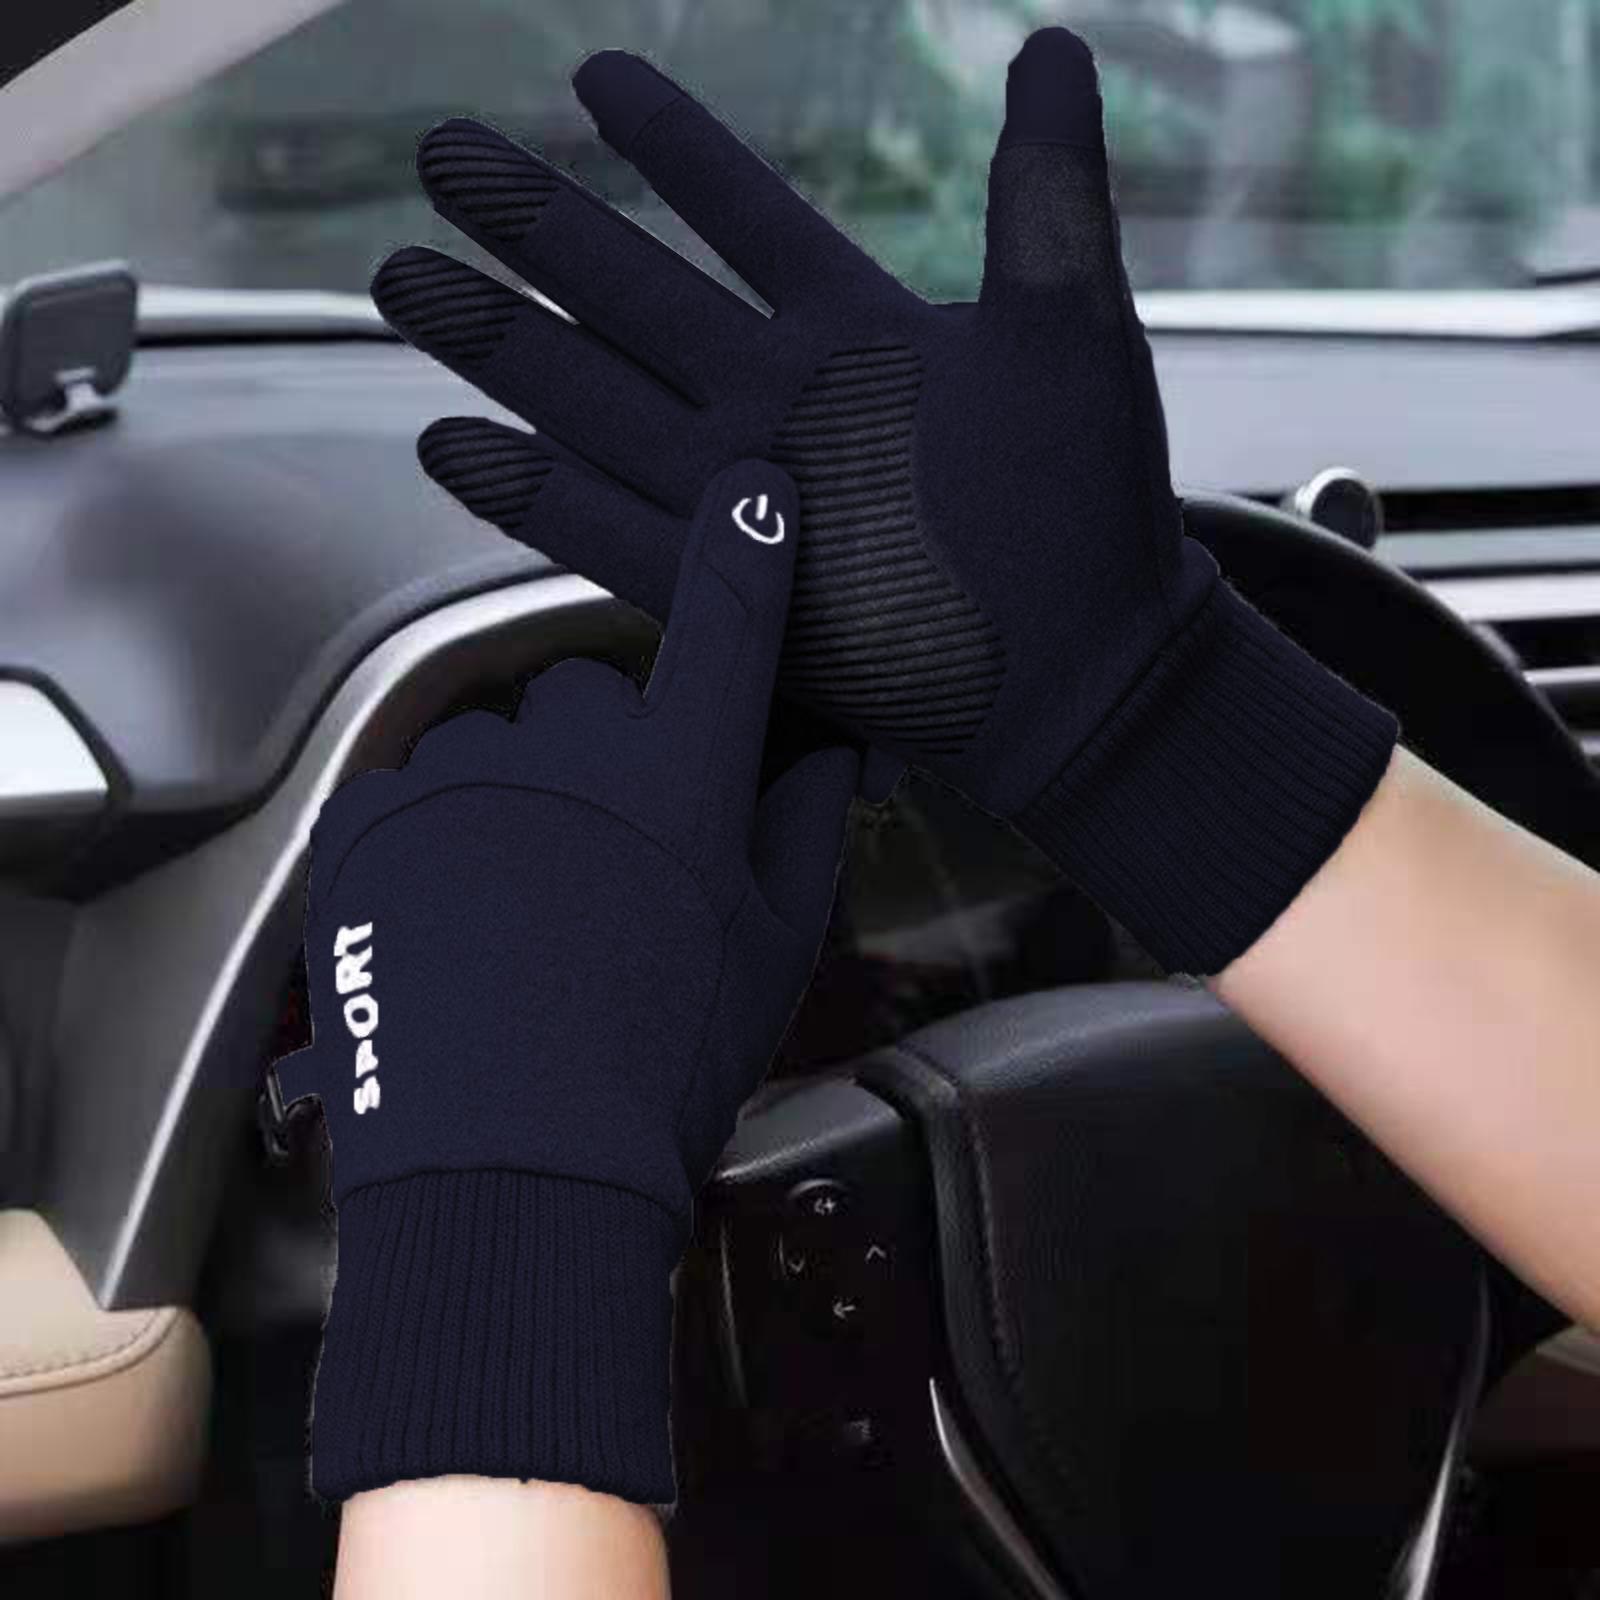 Thermal Gloves Commuting Winter Gloves for Driving Outdoor Sports Riding Dark Blue Medium